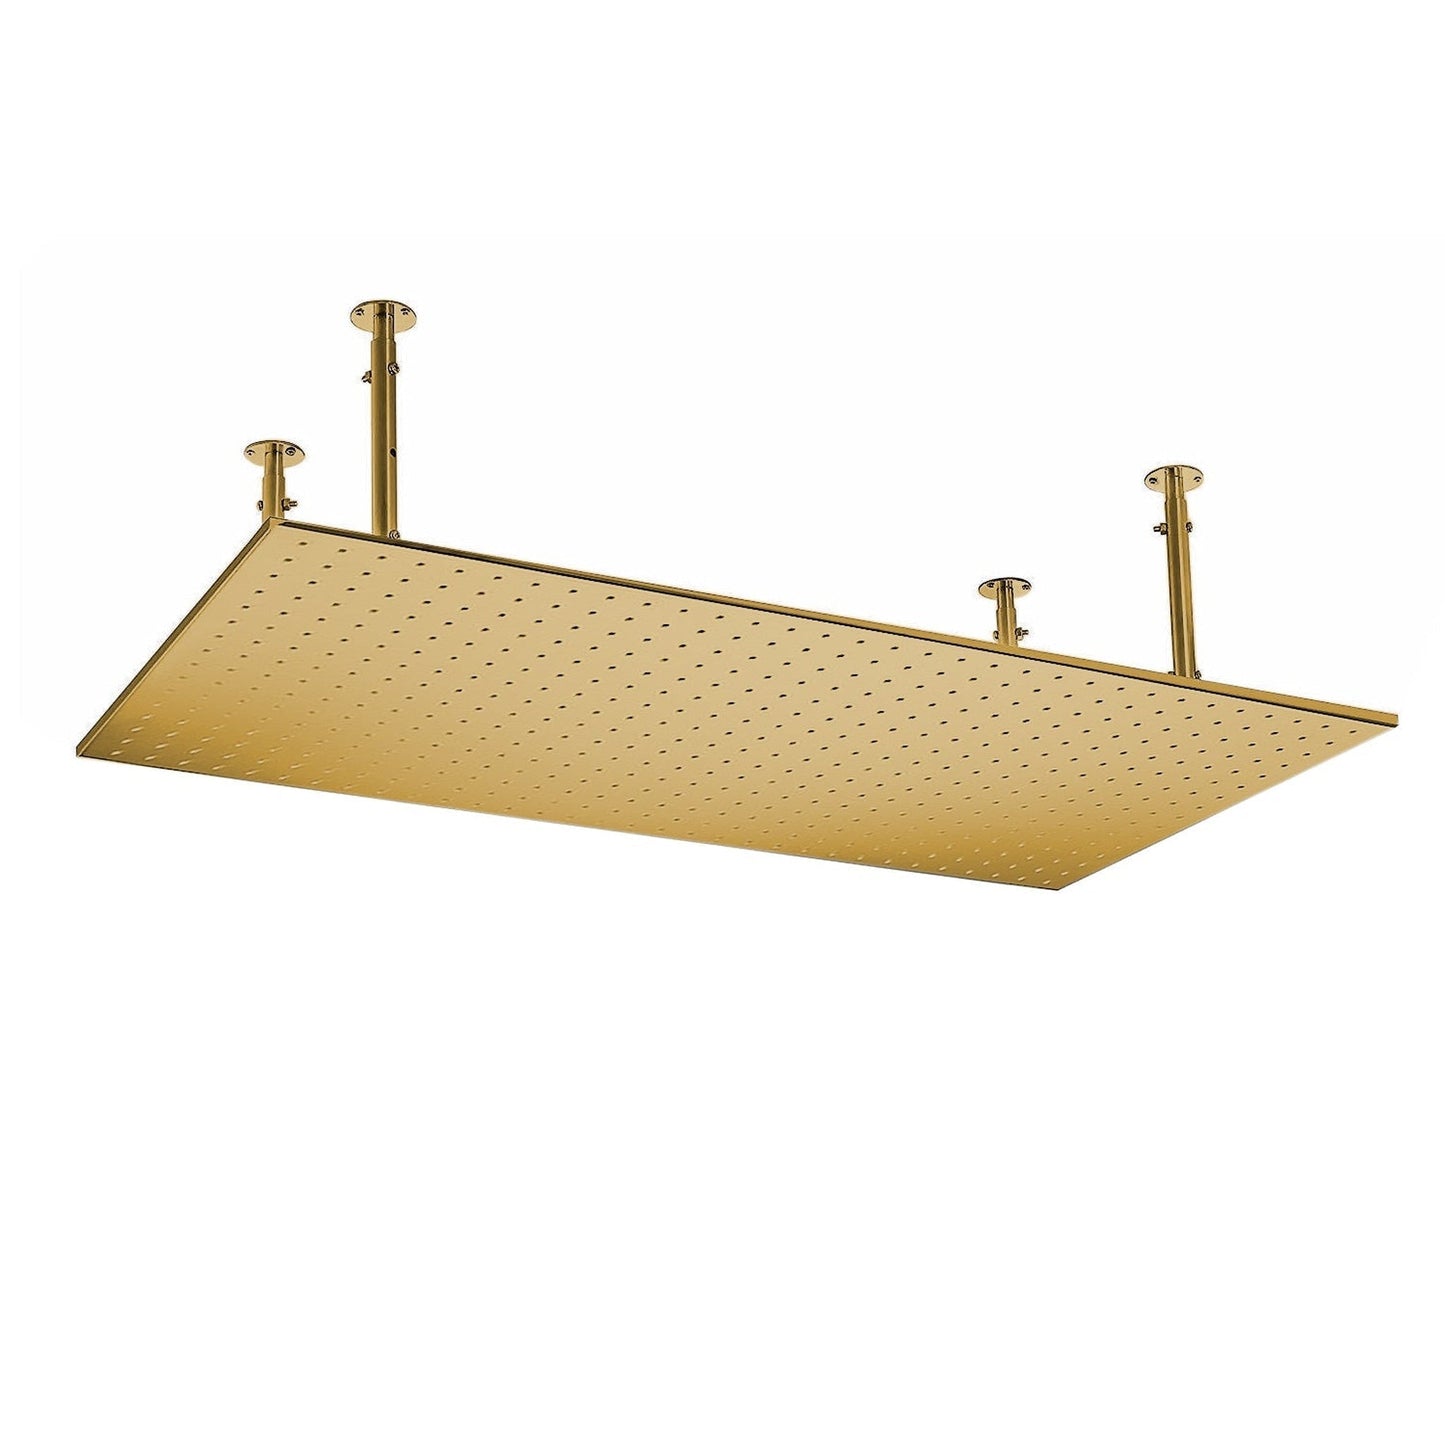 Fontana Martinique Creative Luxury Large Brushed Gold Rectangular Ceiling Mounted LED Solid Brass Shower Head Rain Shower System With 6-Jet Body Sprays and Hand Shower